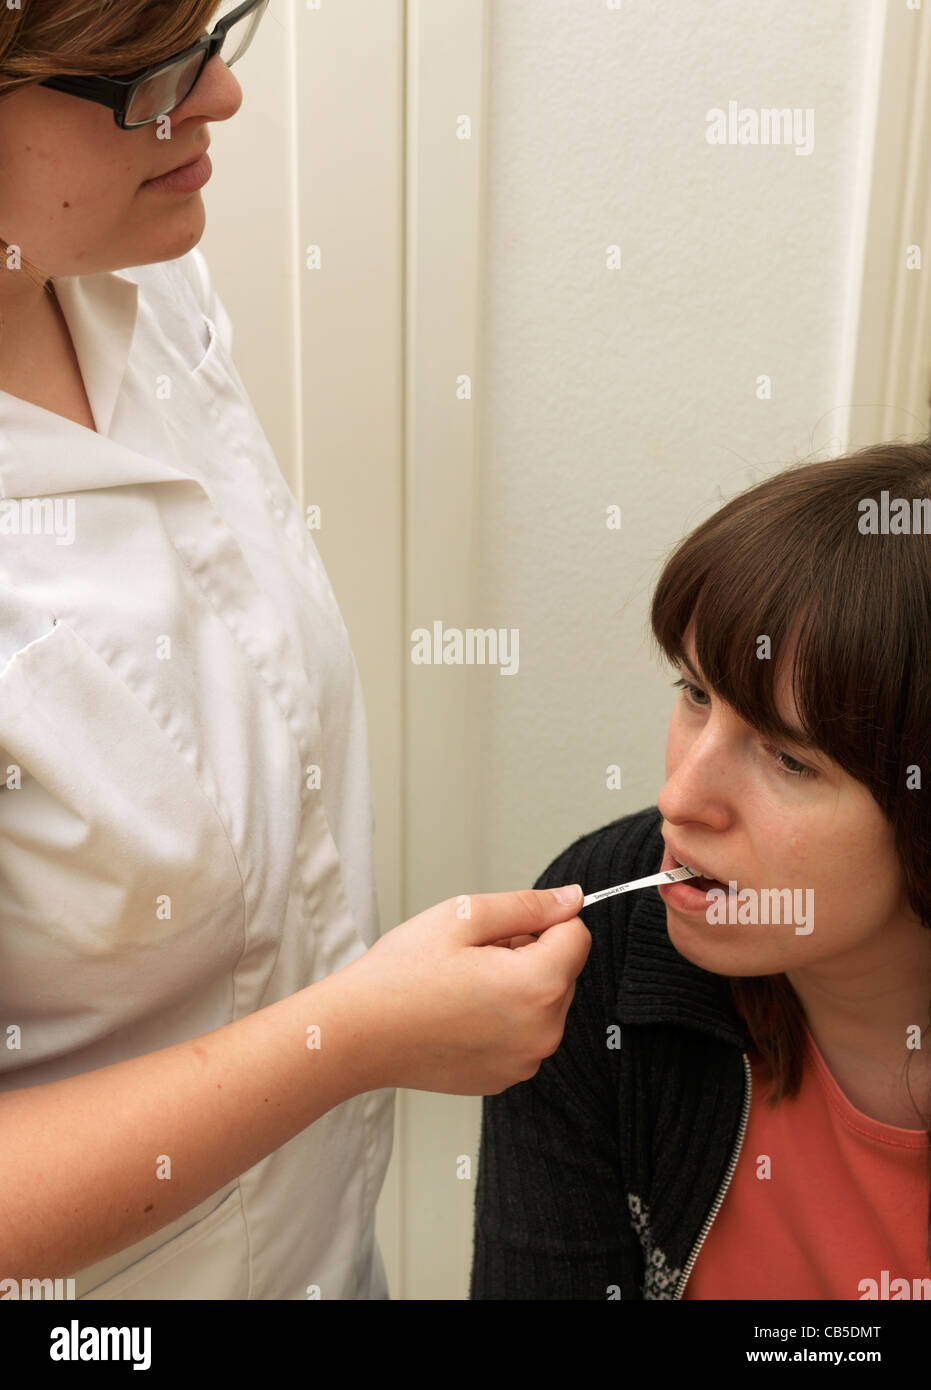 A Nurse Placing An Oral Paper Thermometer (Tempa DOT) In A Patient's Mouth Taking Her Temperature Stock Photo